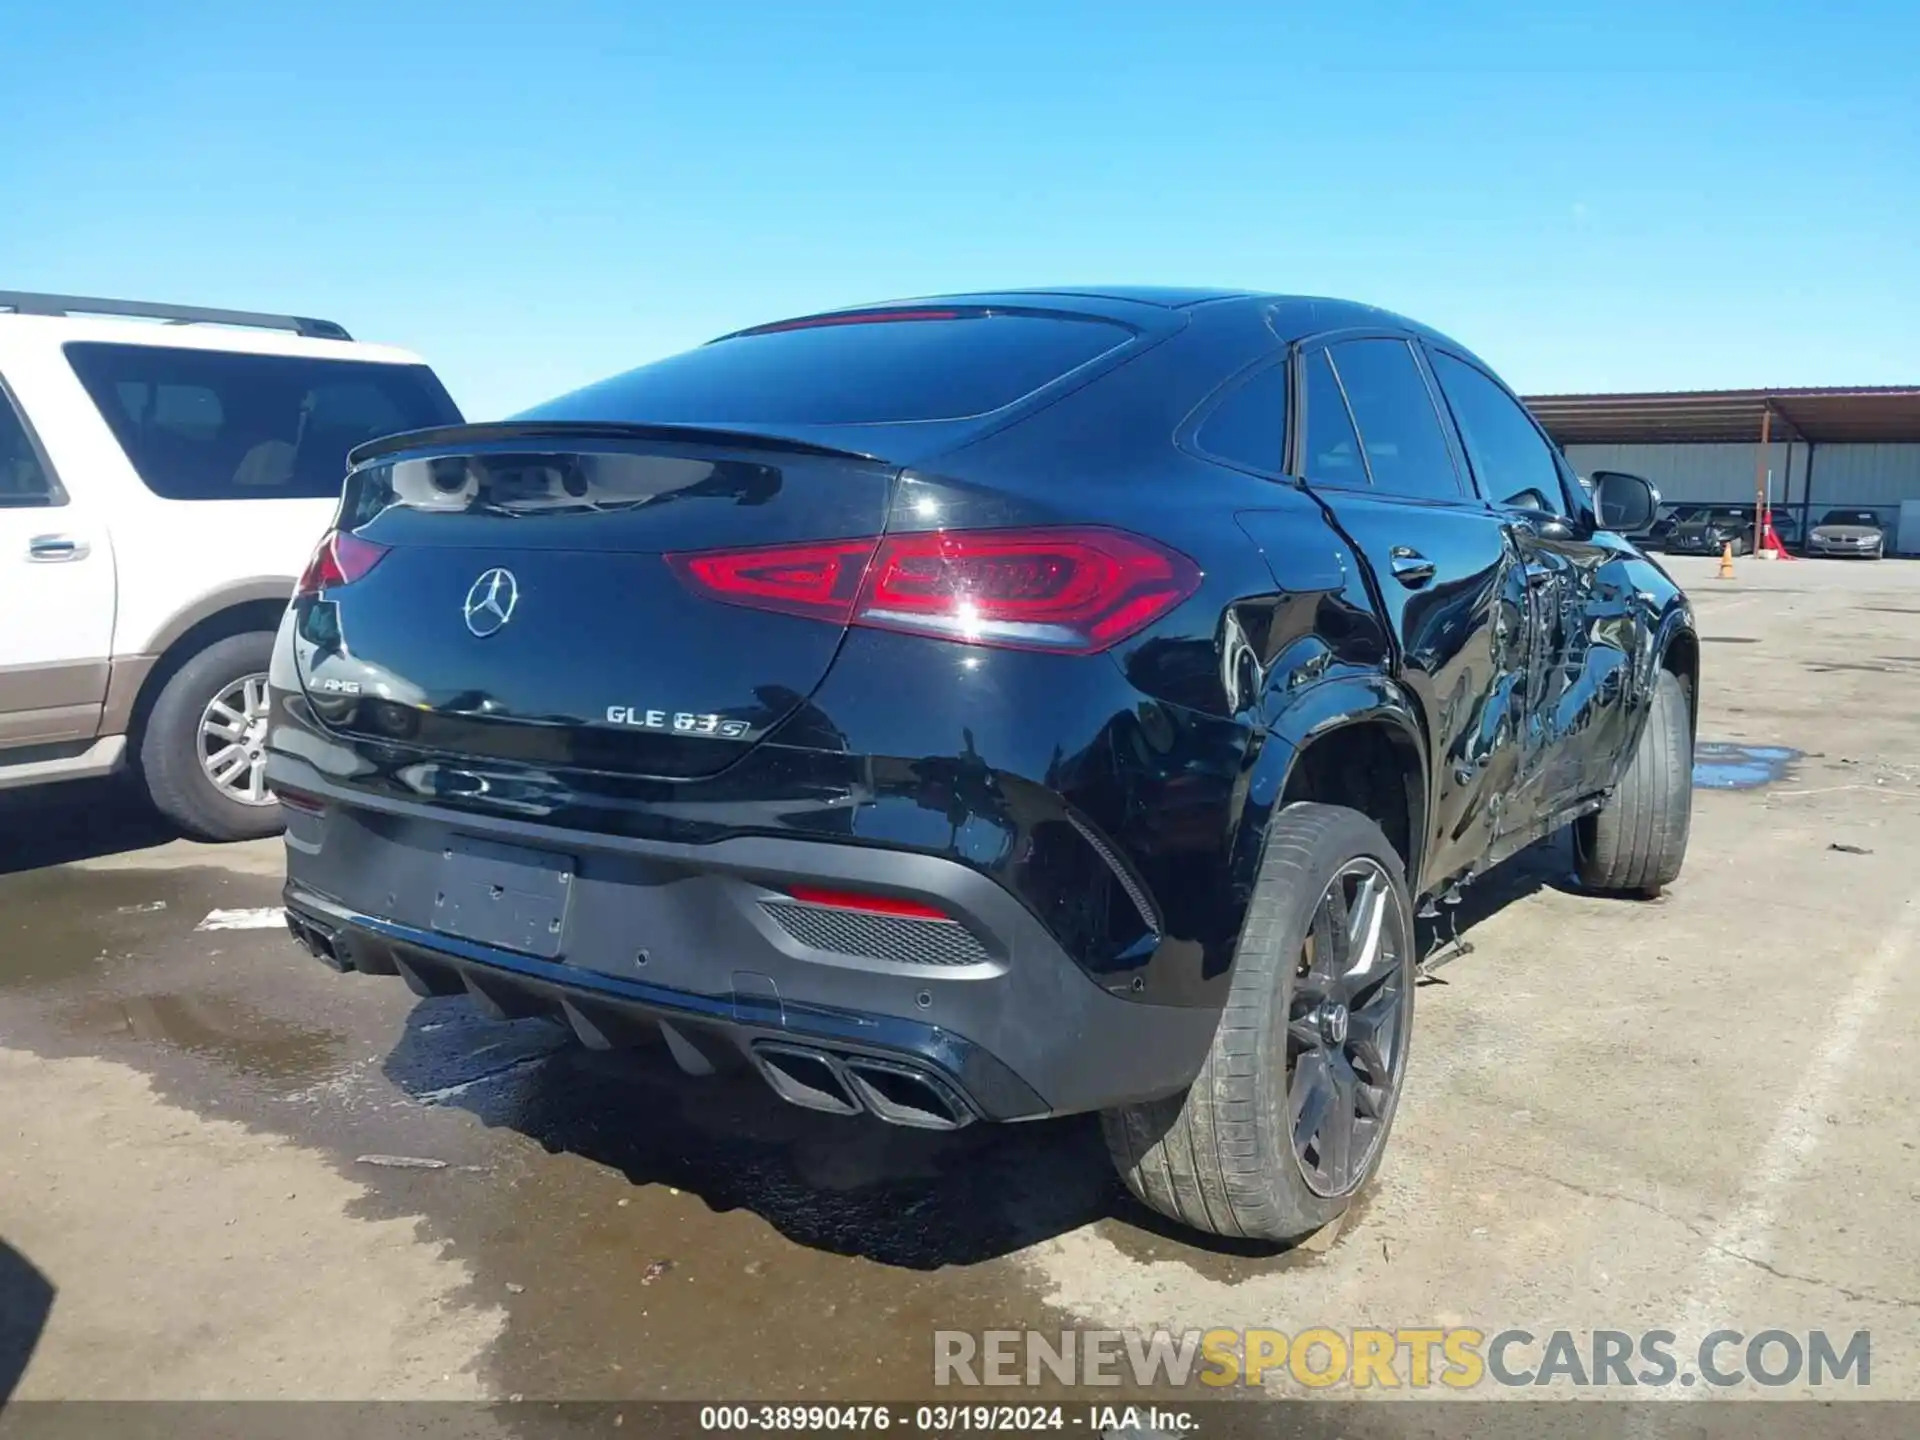 4 Photograph of a damaged car 4JGFD8KB3MA391605 MERCEDES-BENZ AMG GLE 63 COUPE 2021